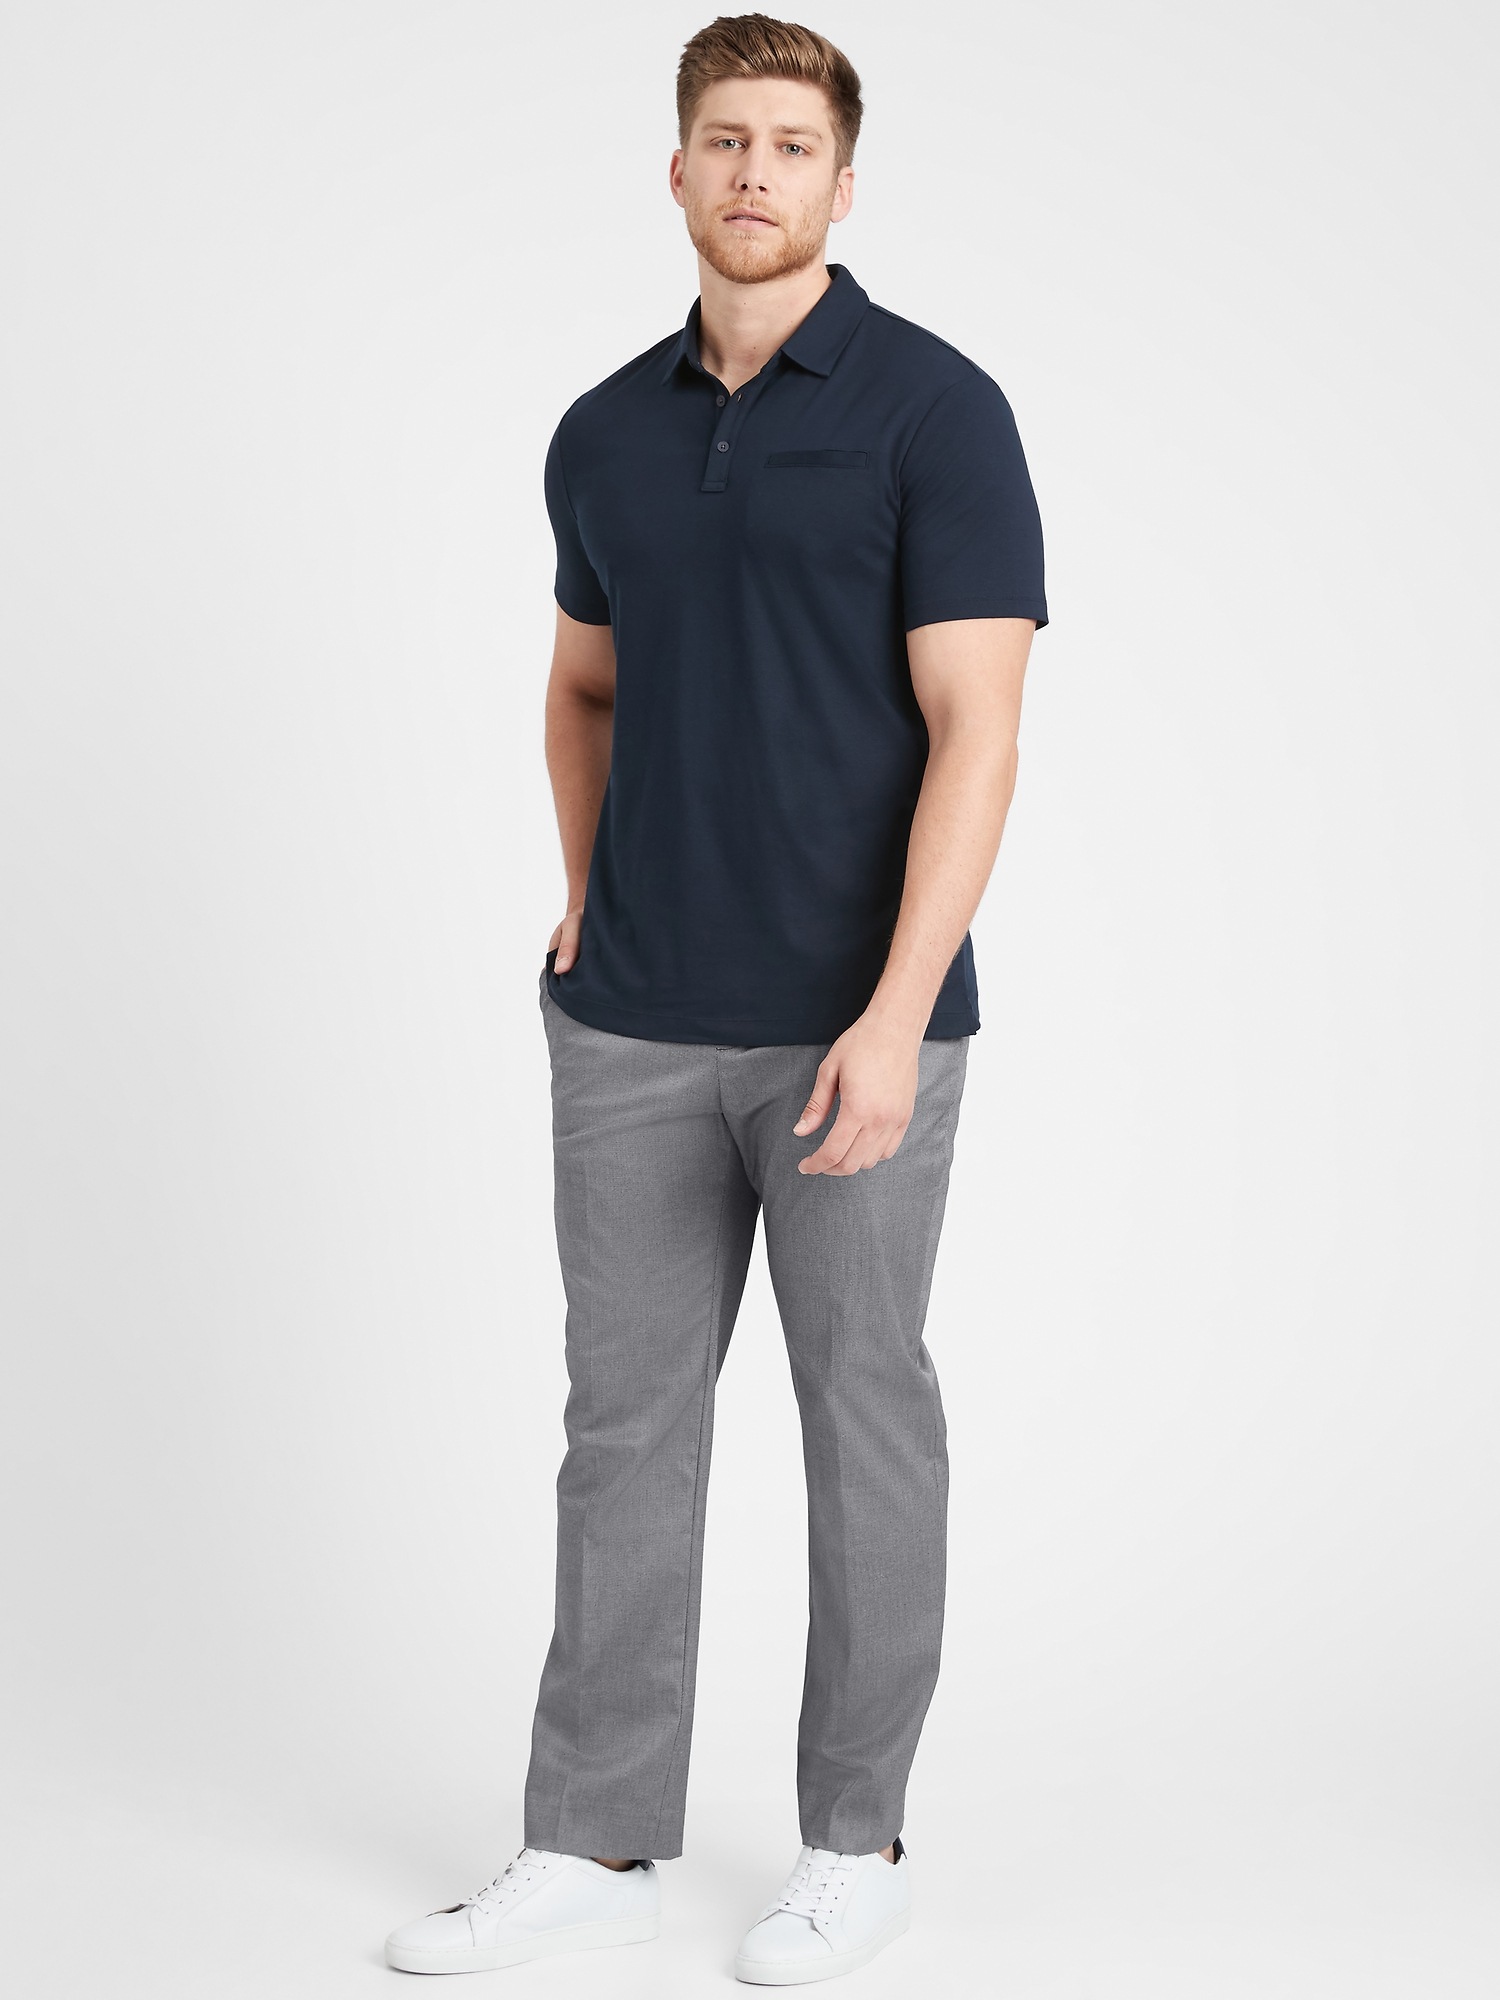 How To Wear The Sloan Pant From Banana Republic  How to wear My style  Pants